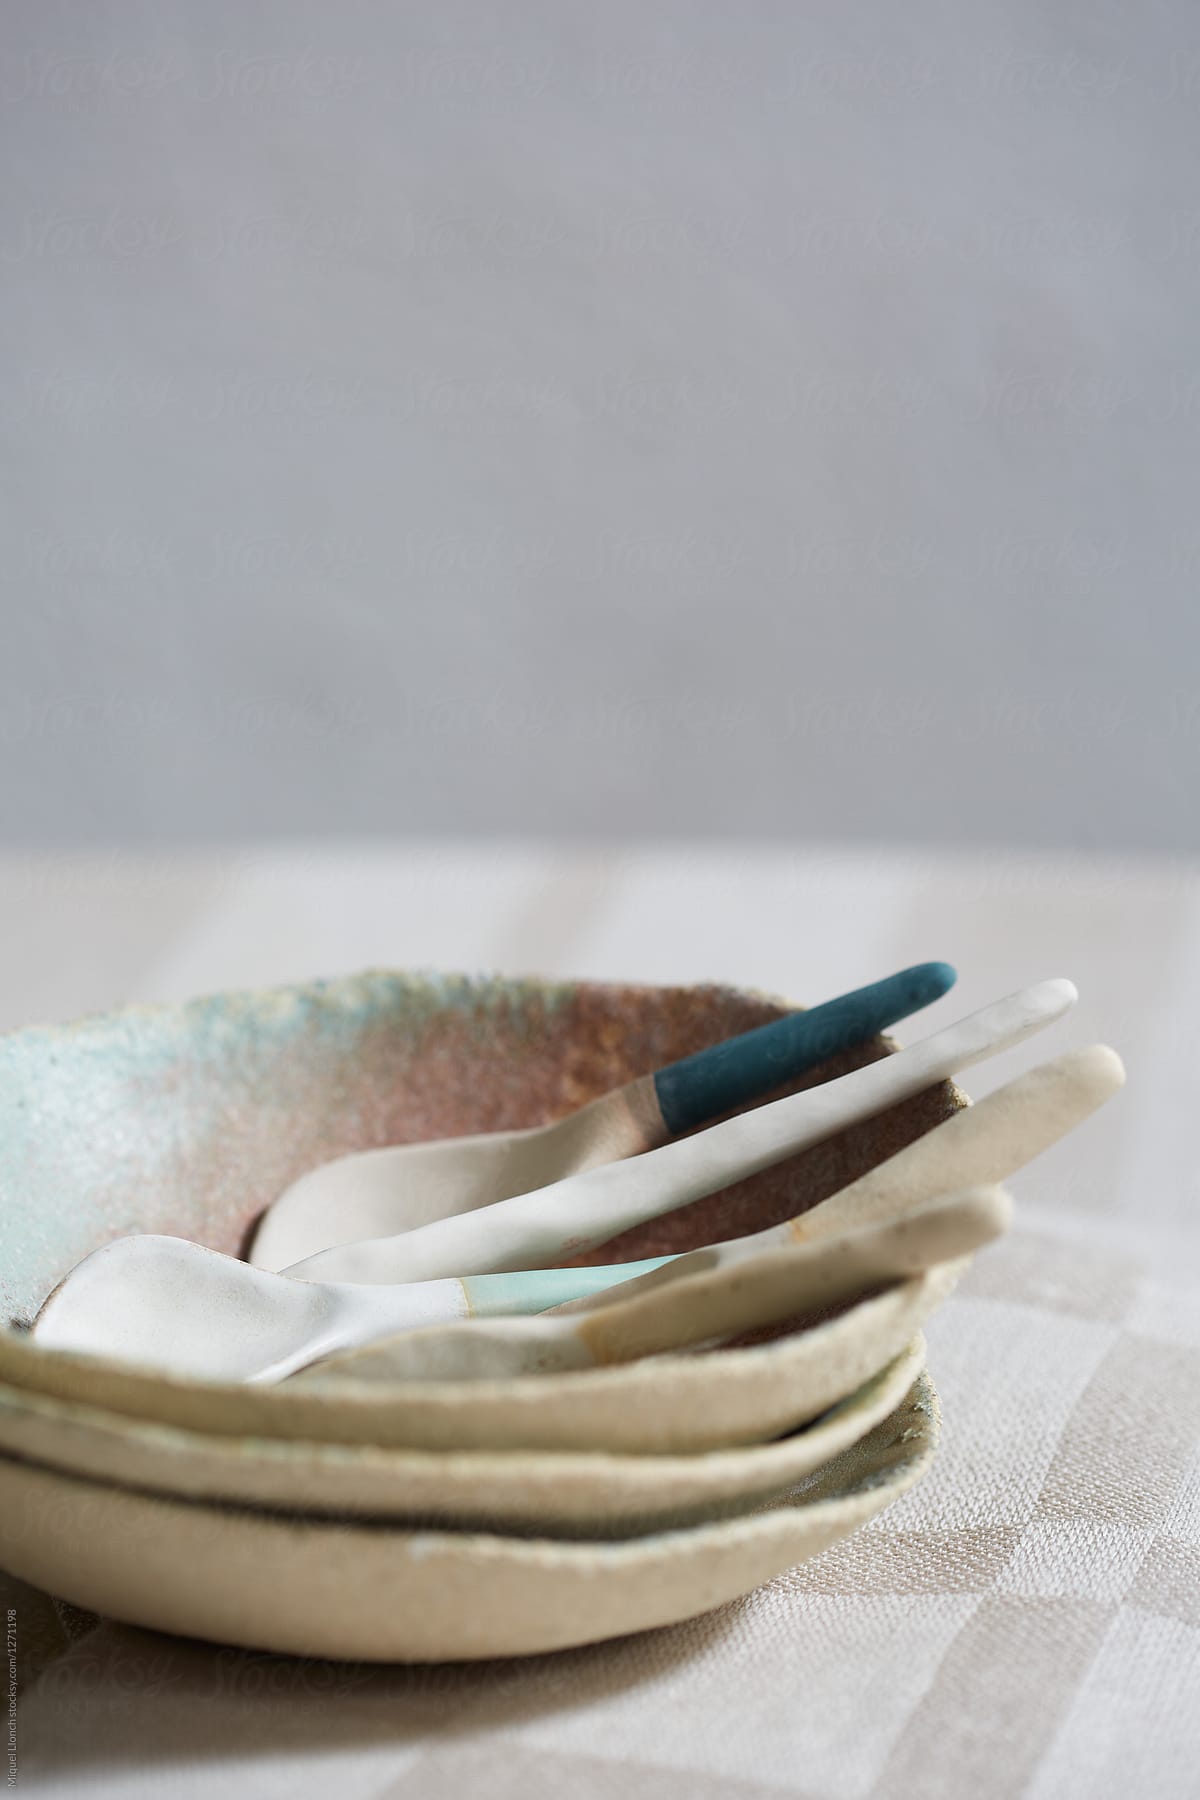 Detail of ceramic table ware with spoons and stacked bowls